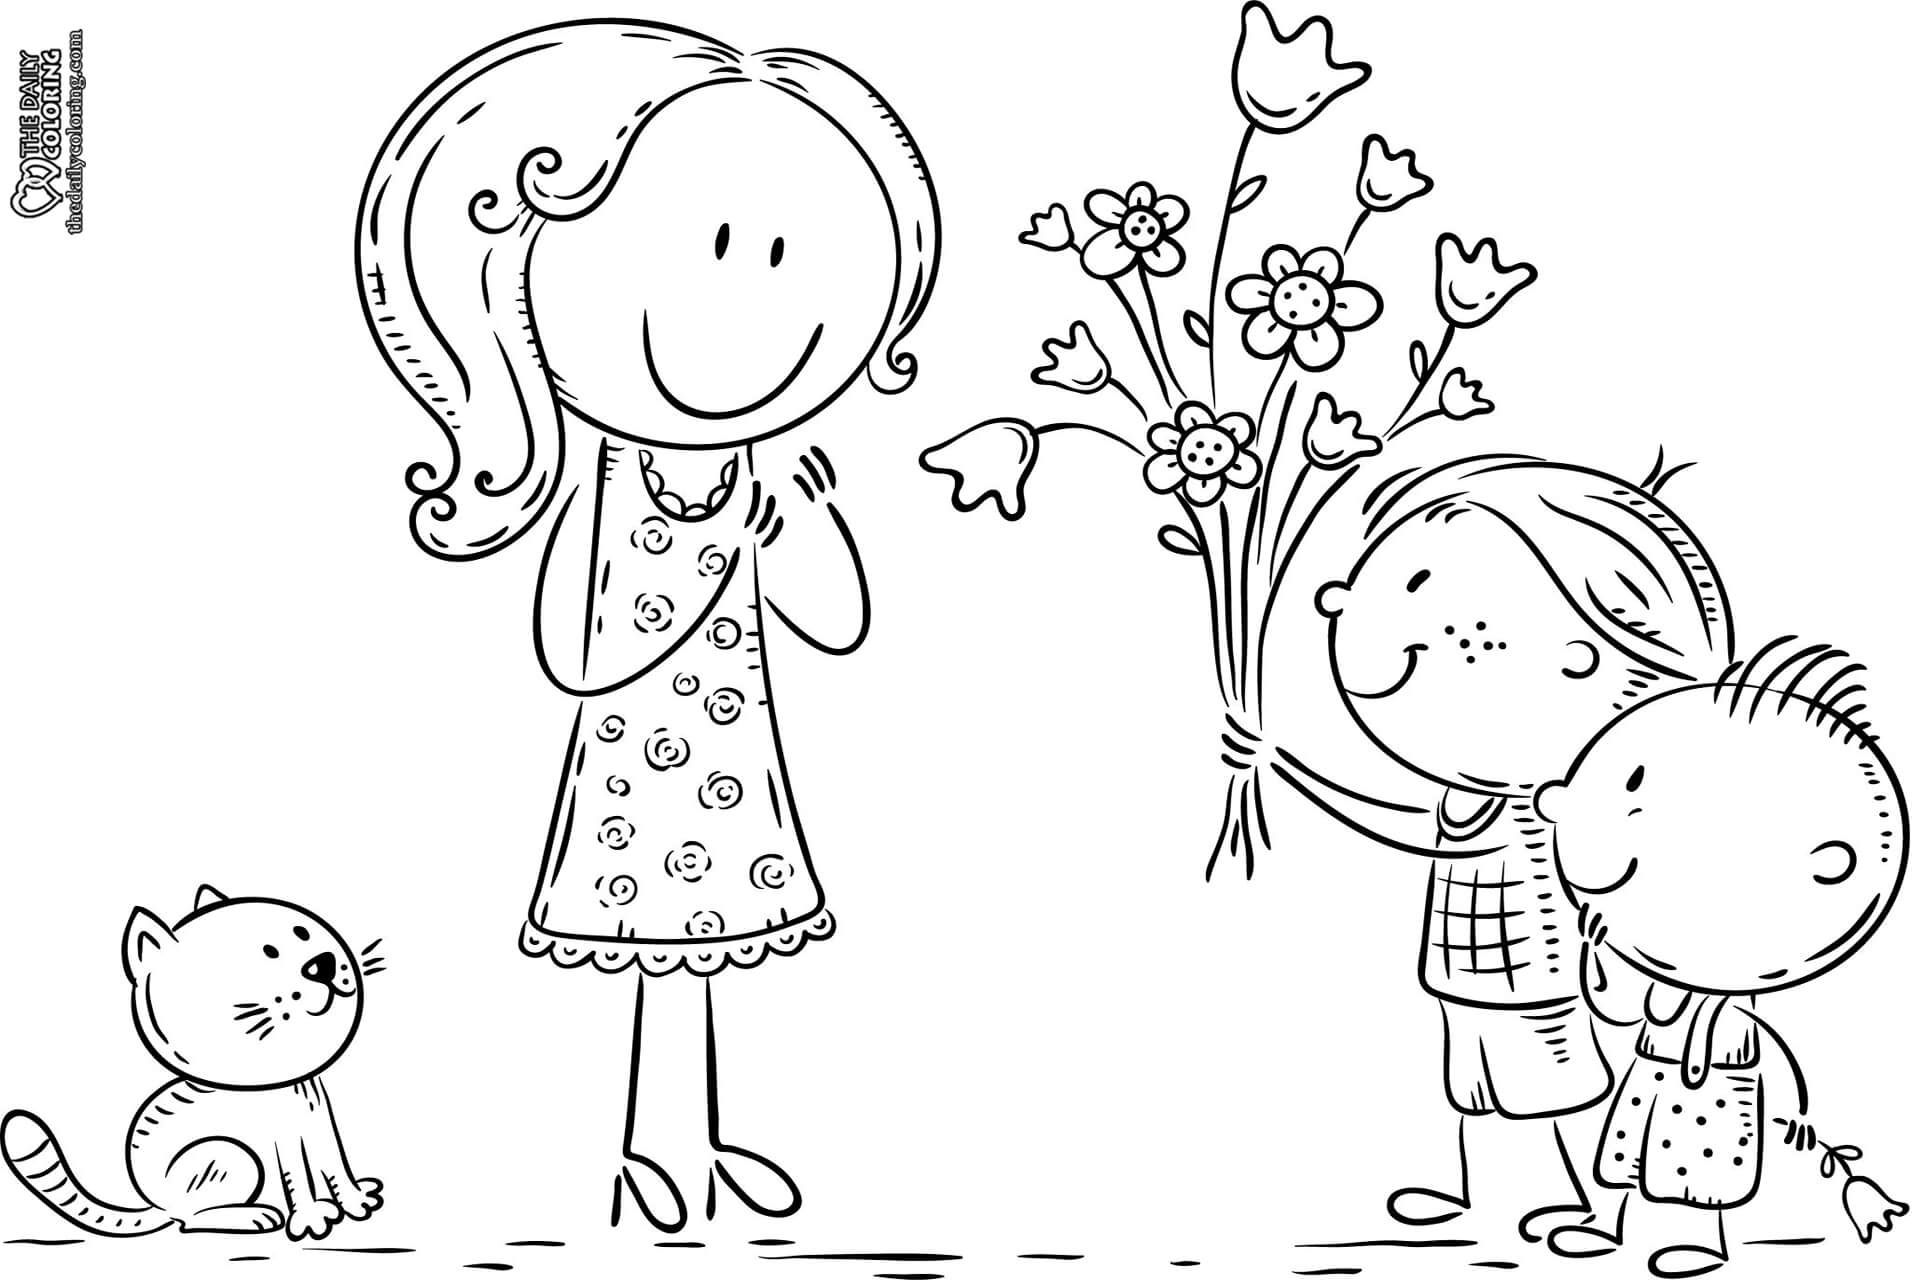 teachers-day-coloring-page